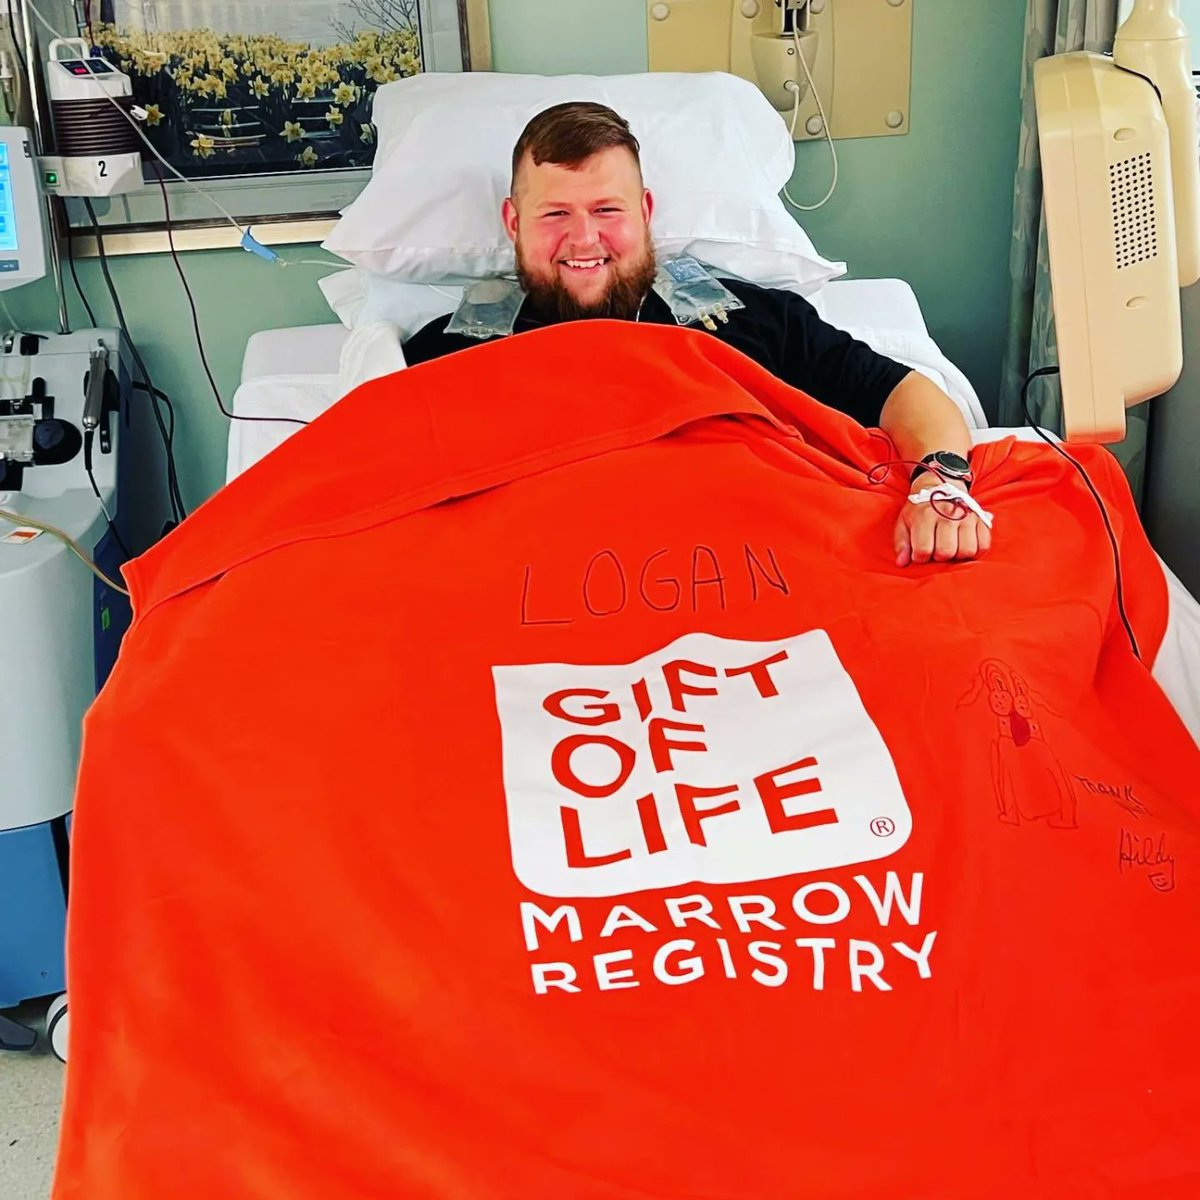 It's National Nonprofit day! My #nonprofit that I want to highlight is @GiftofLife! They took amazing care of me during my donation back in April! #NationalNonprofitDay